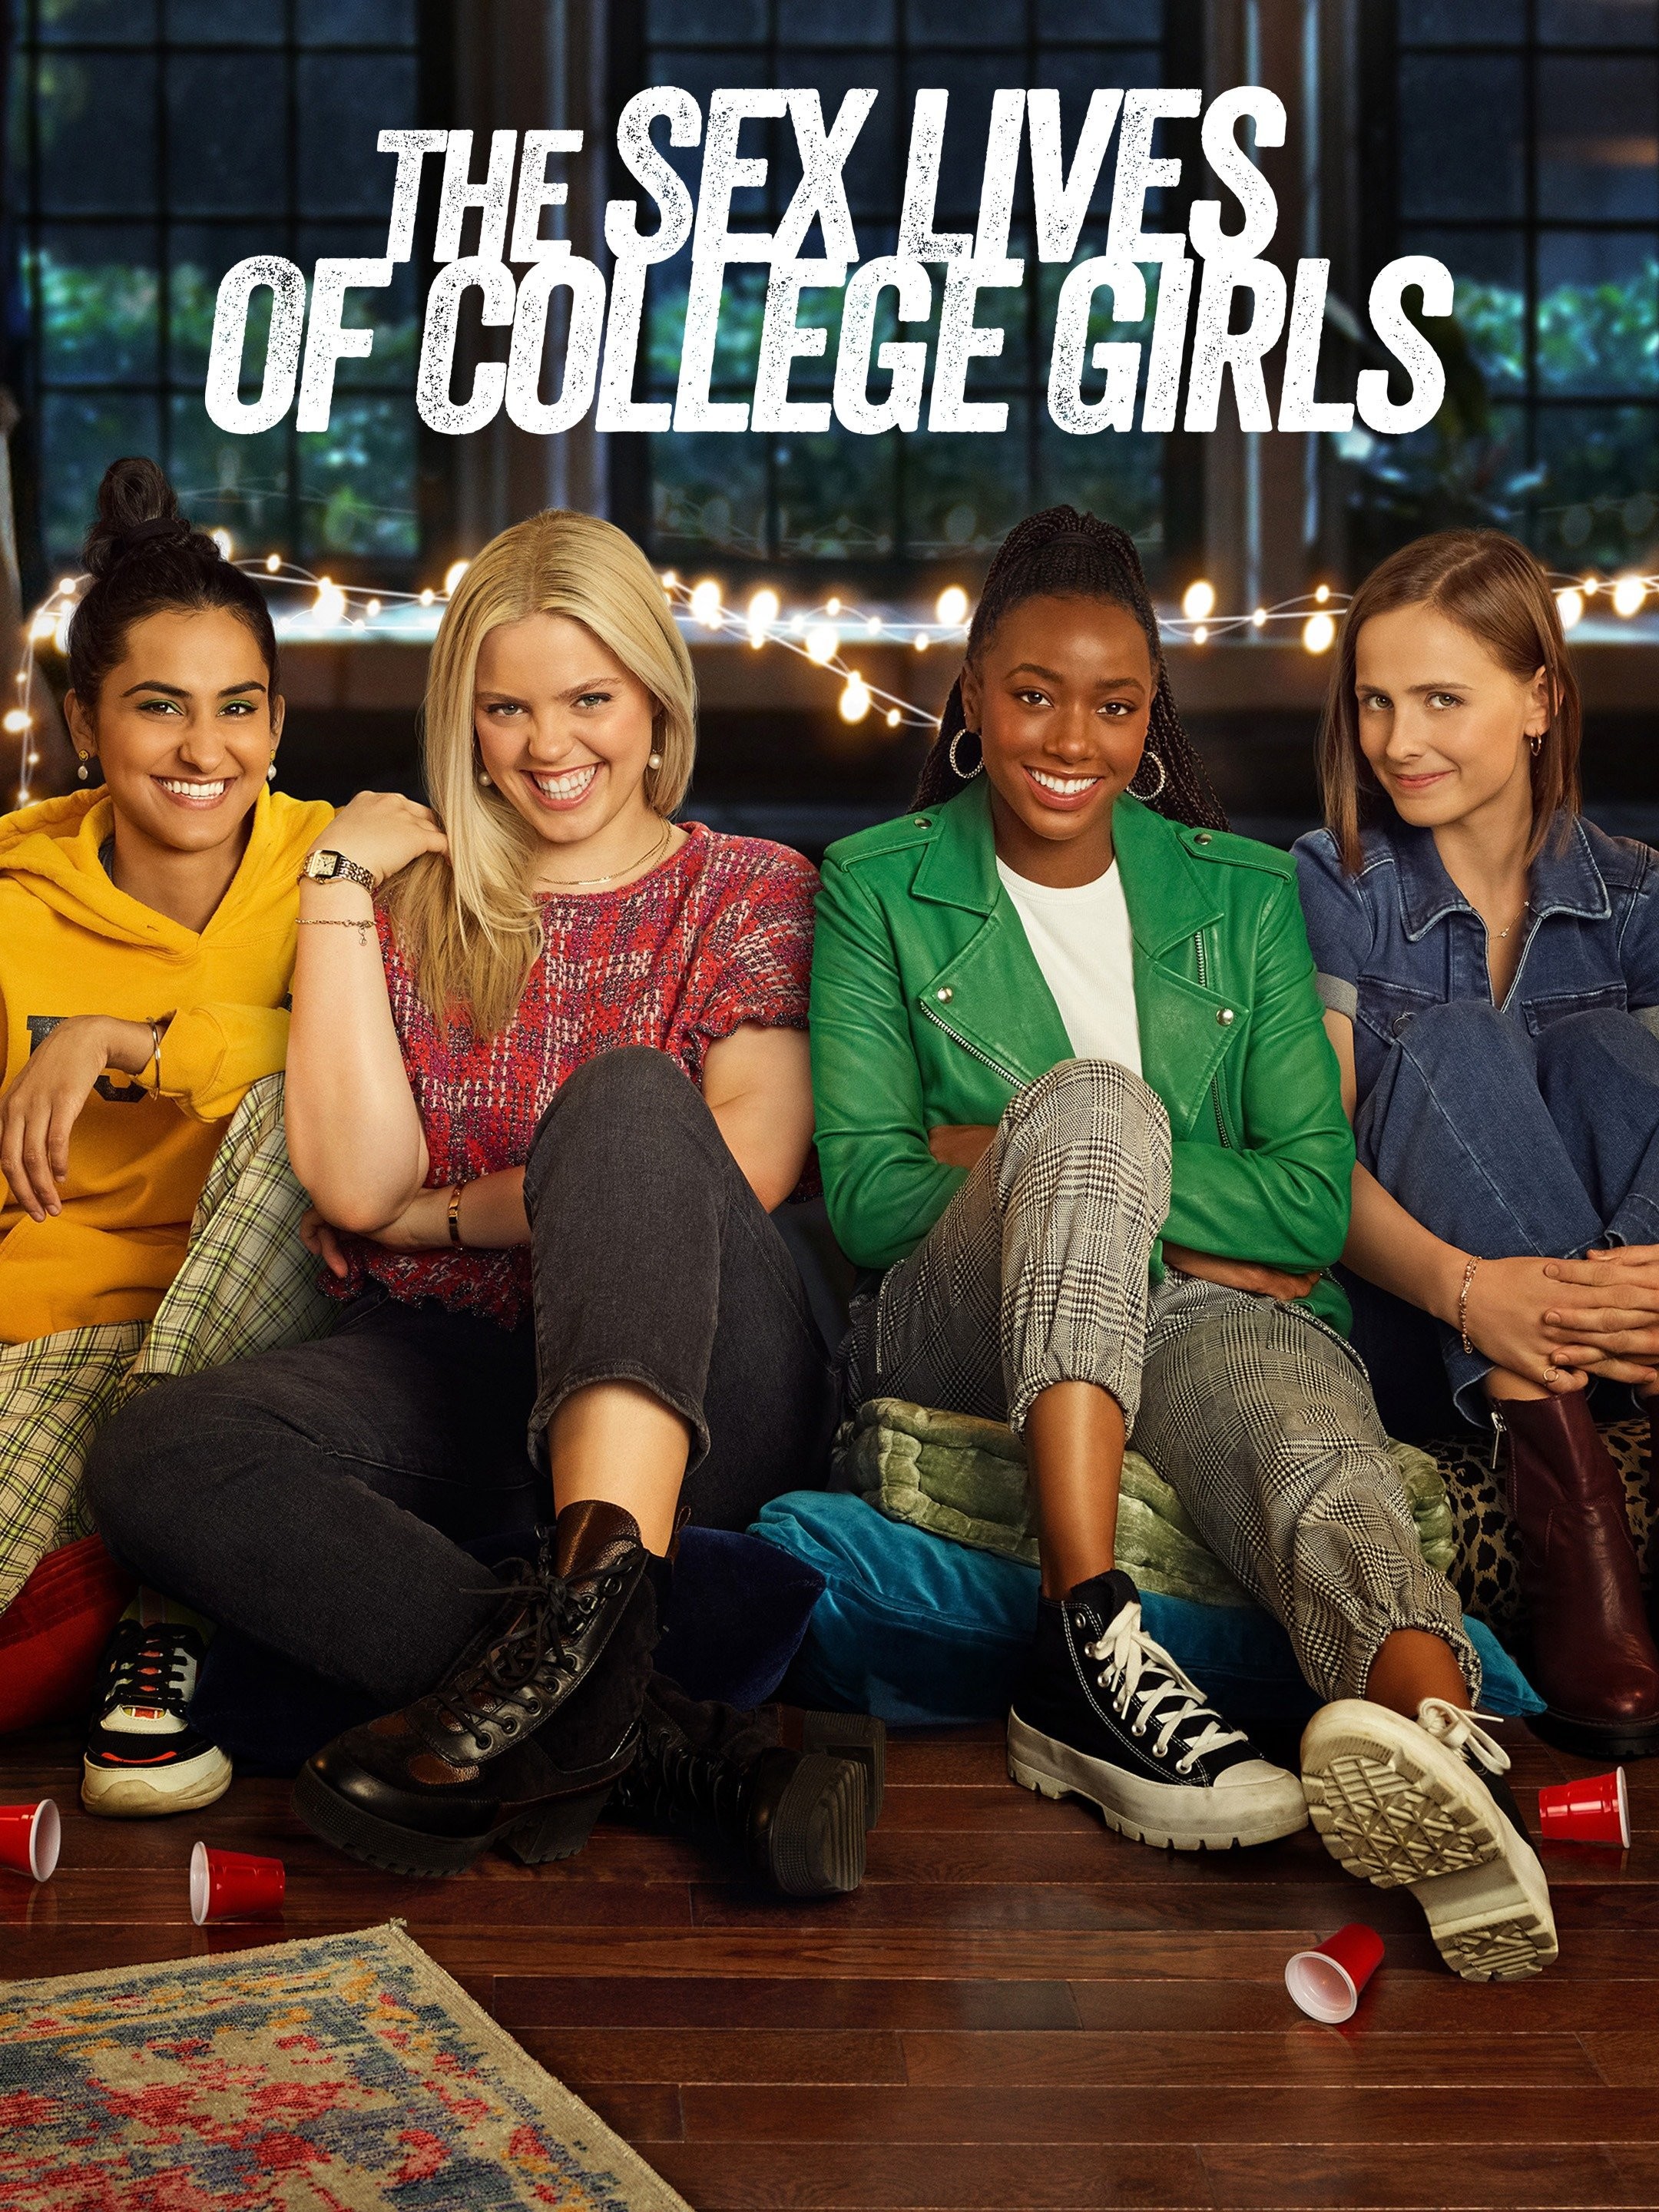 The Sex Lives of College Girls Season 2 | Rotten Tomatoes